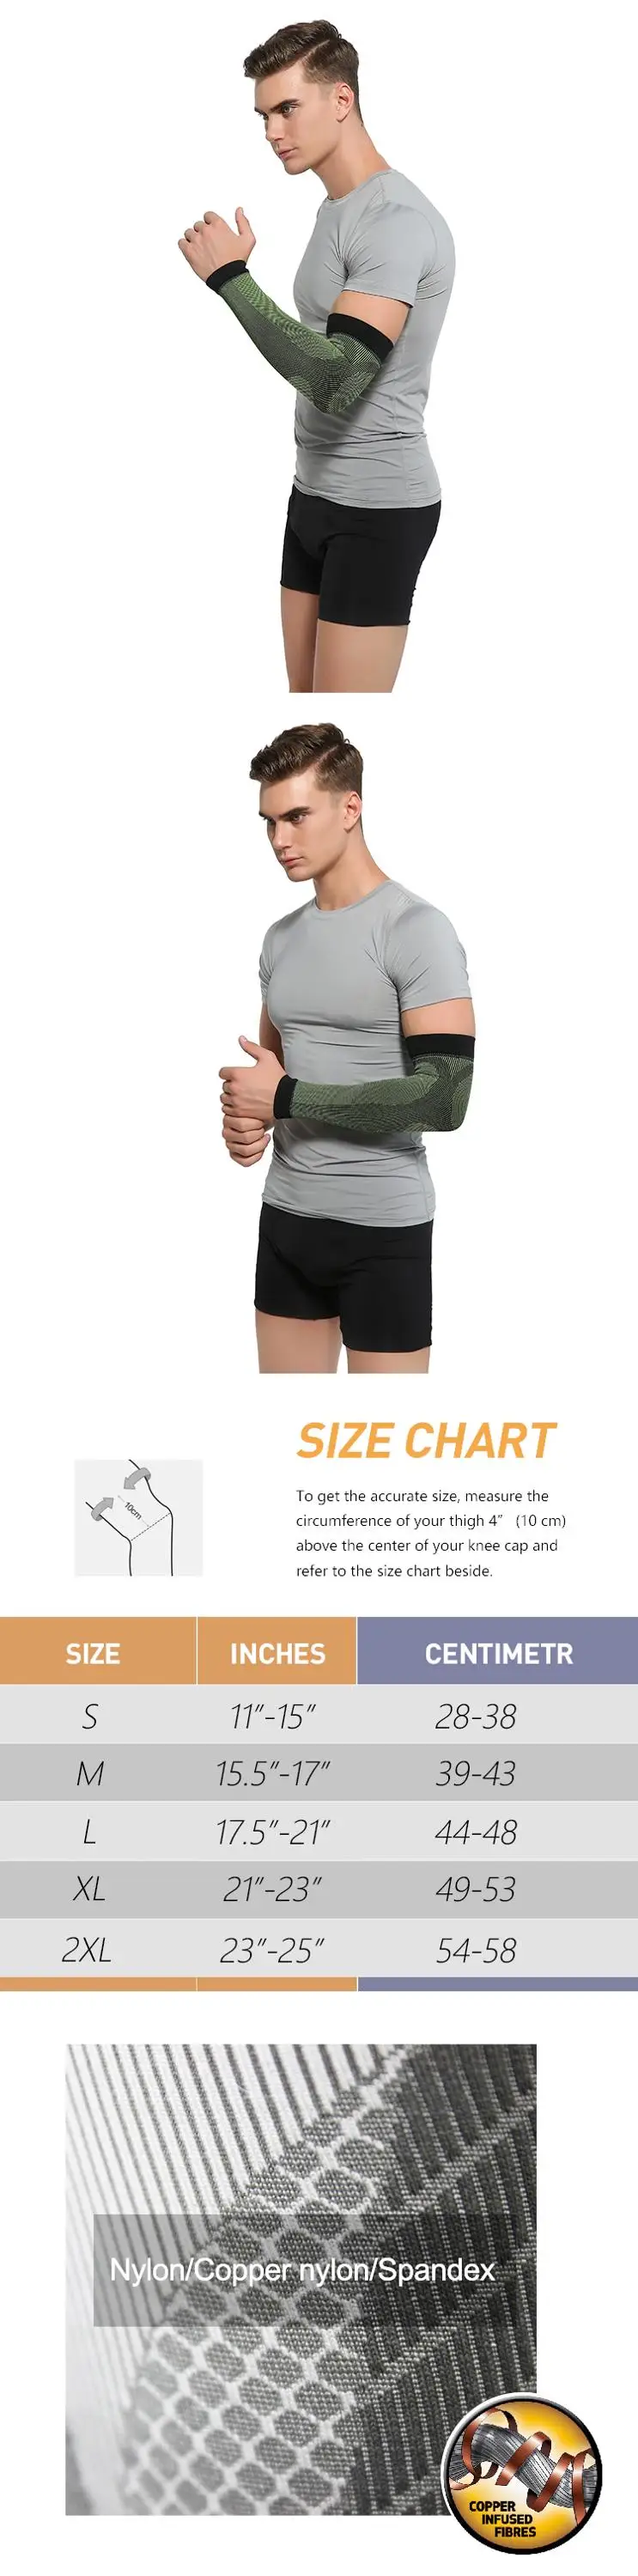 Free Sample Sports Equipment Copper Compression Elbow Brace Arm sleeves